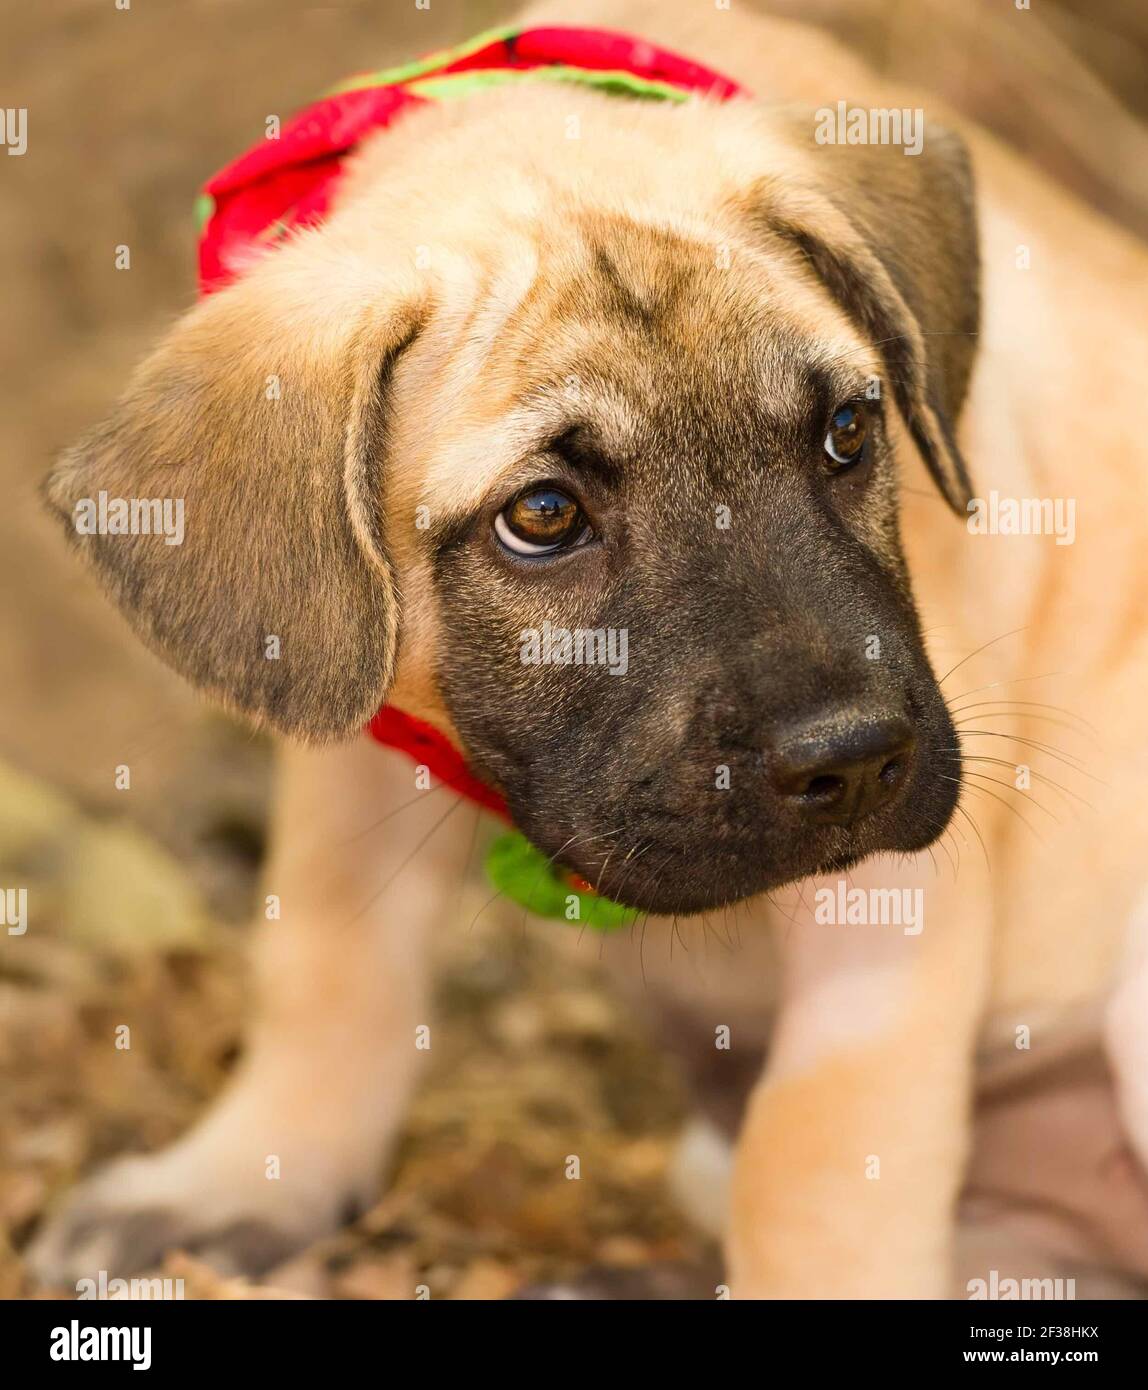 A puppy Dog is Looking Very Sad in a Vertical Format Stock Photo